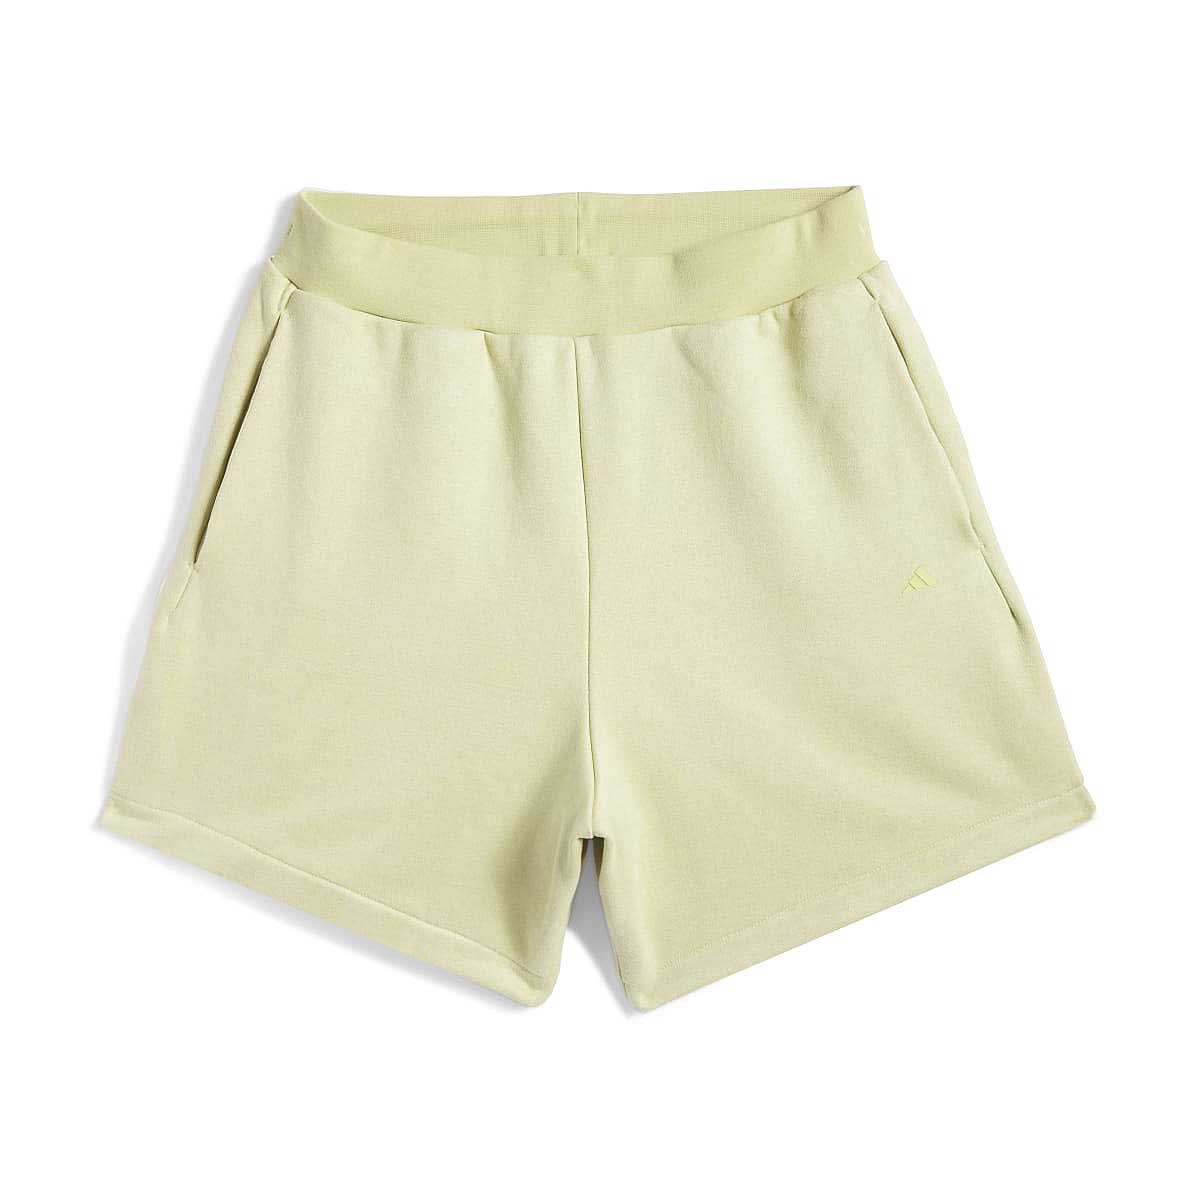 Image of Adidas Basketball Sueded Shorts, Halgol